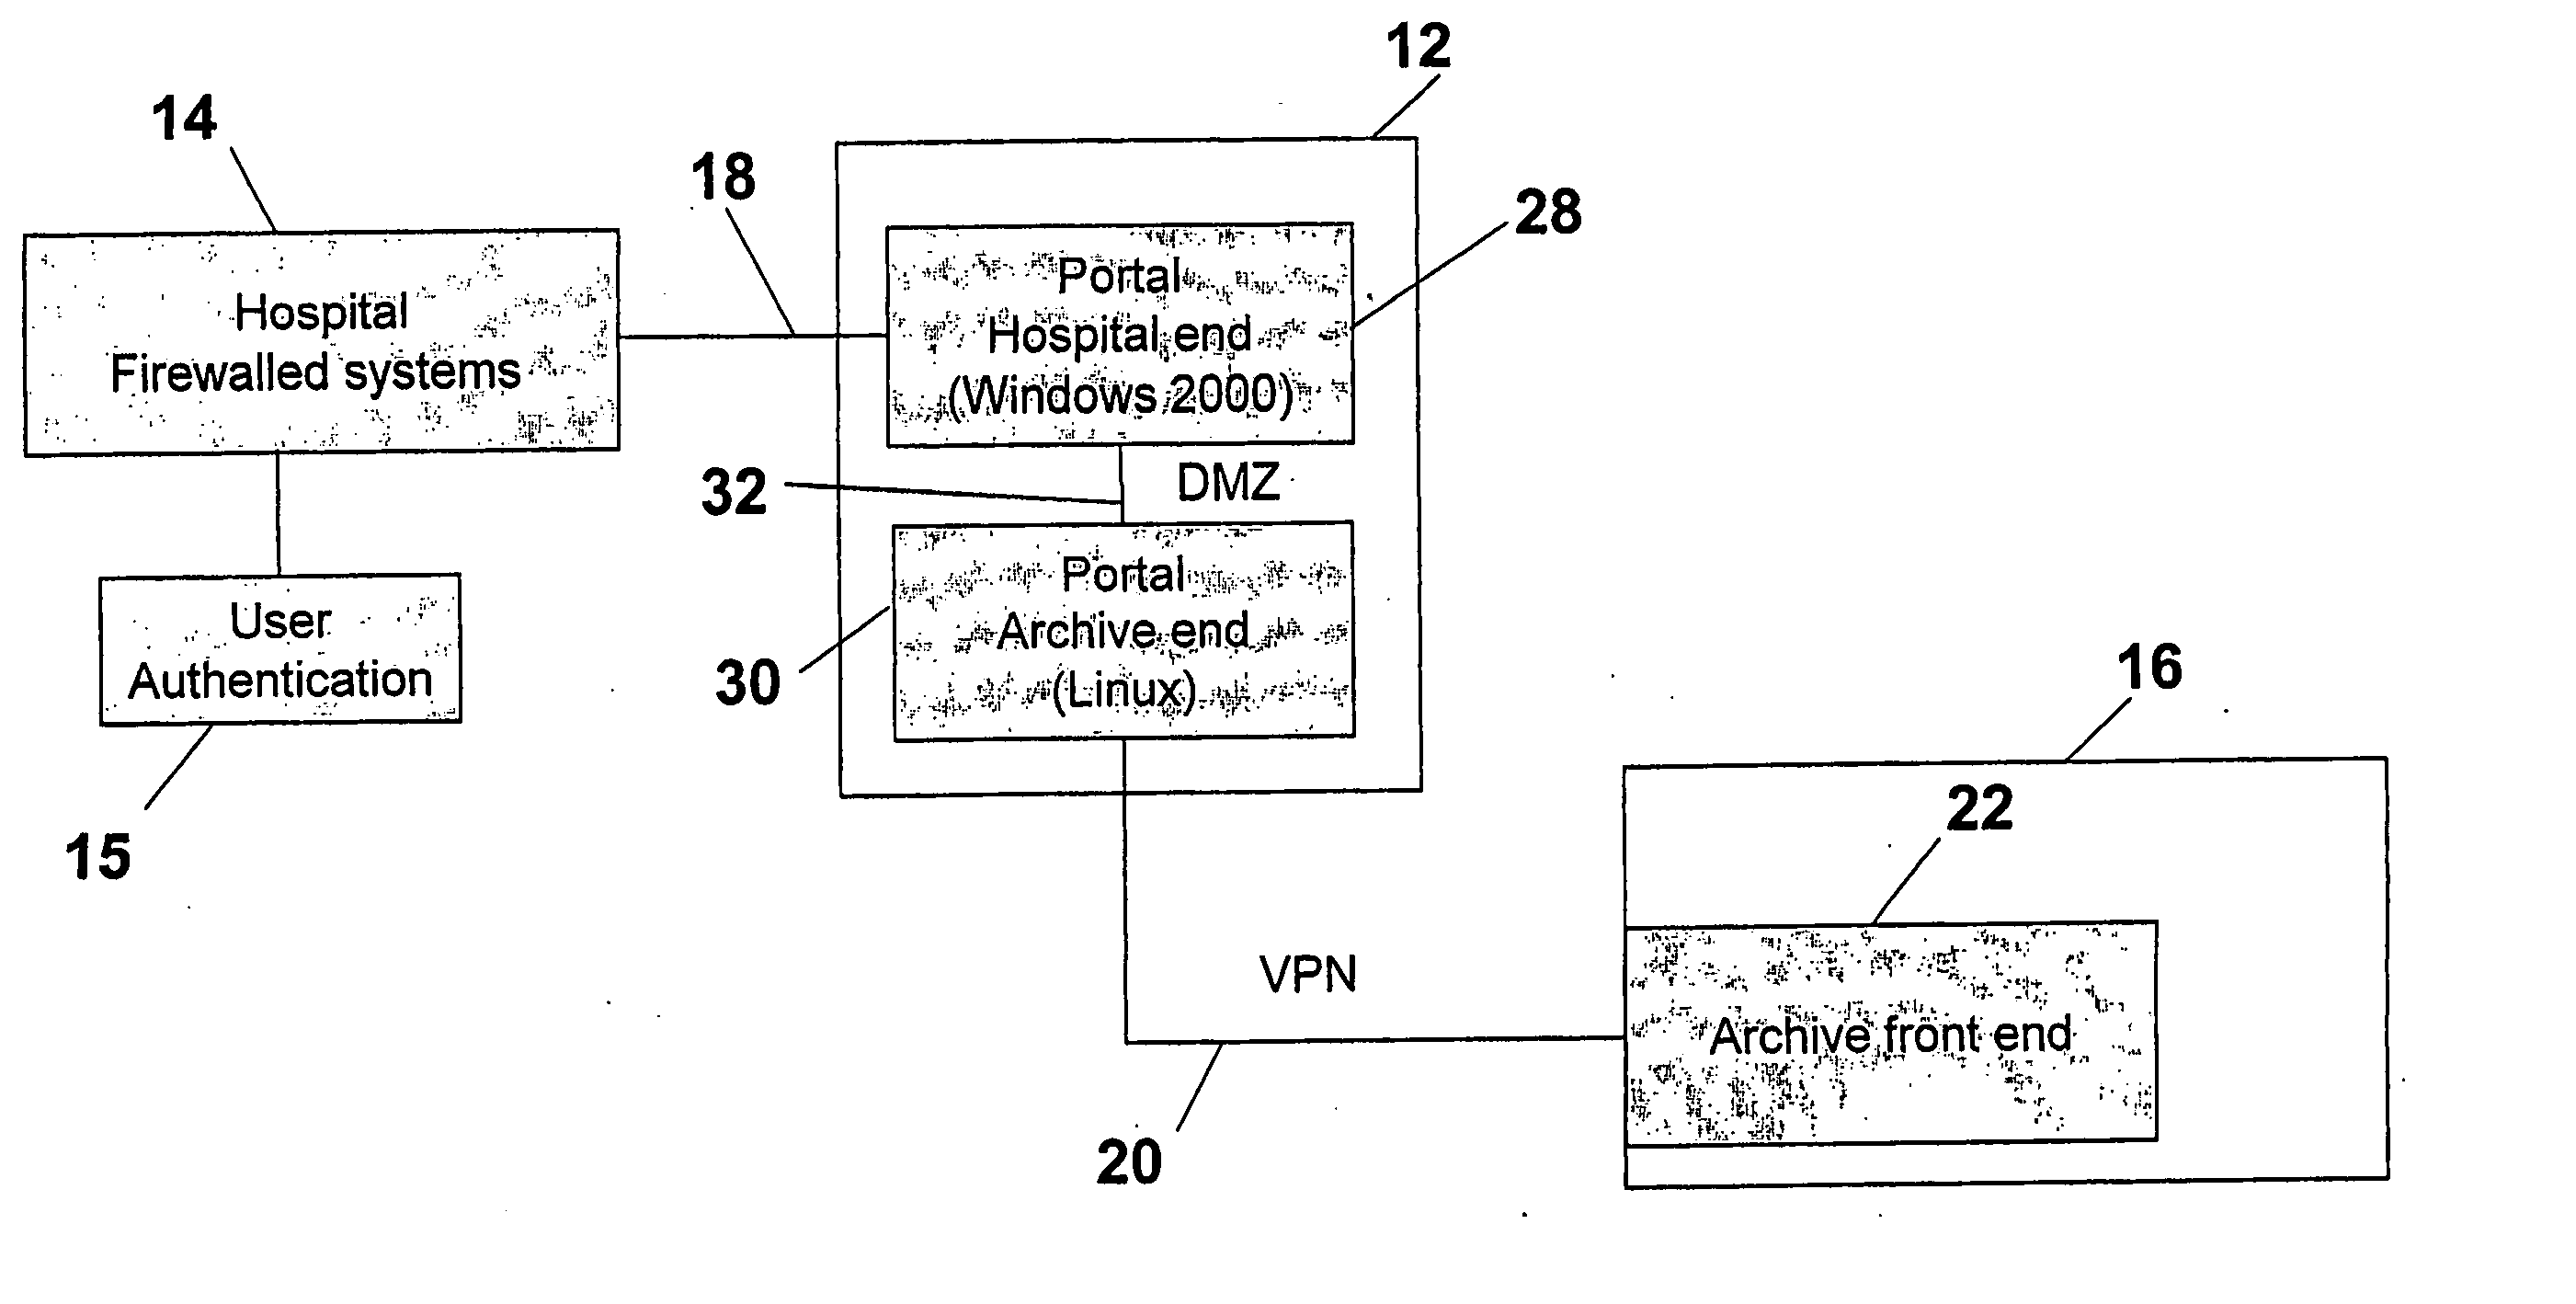 Cross-enterprise wallplug for connecting internal hospital/clinic imaging systems to external storage and retrieval systems